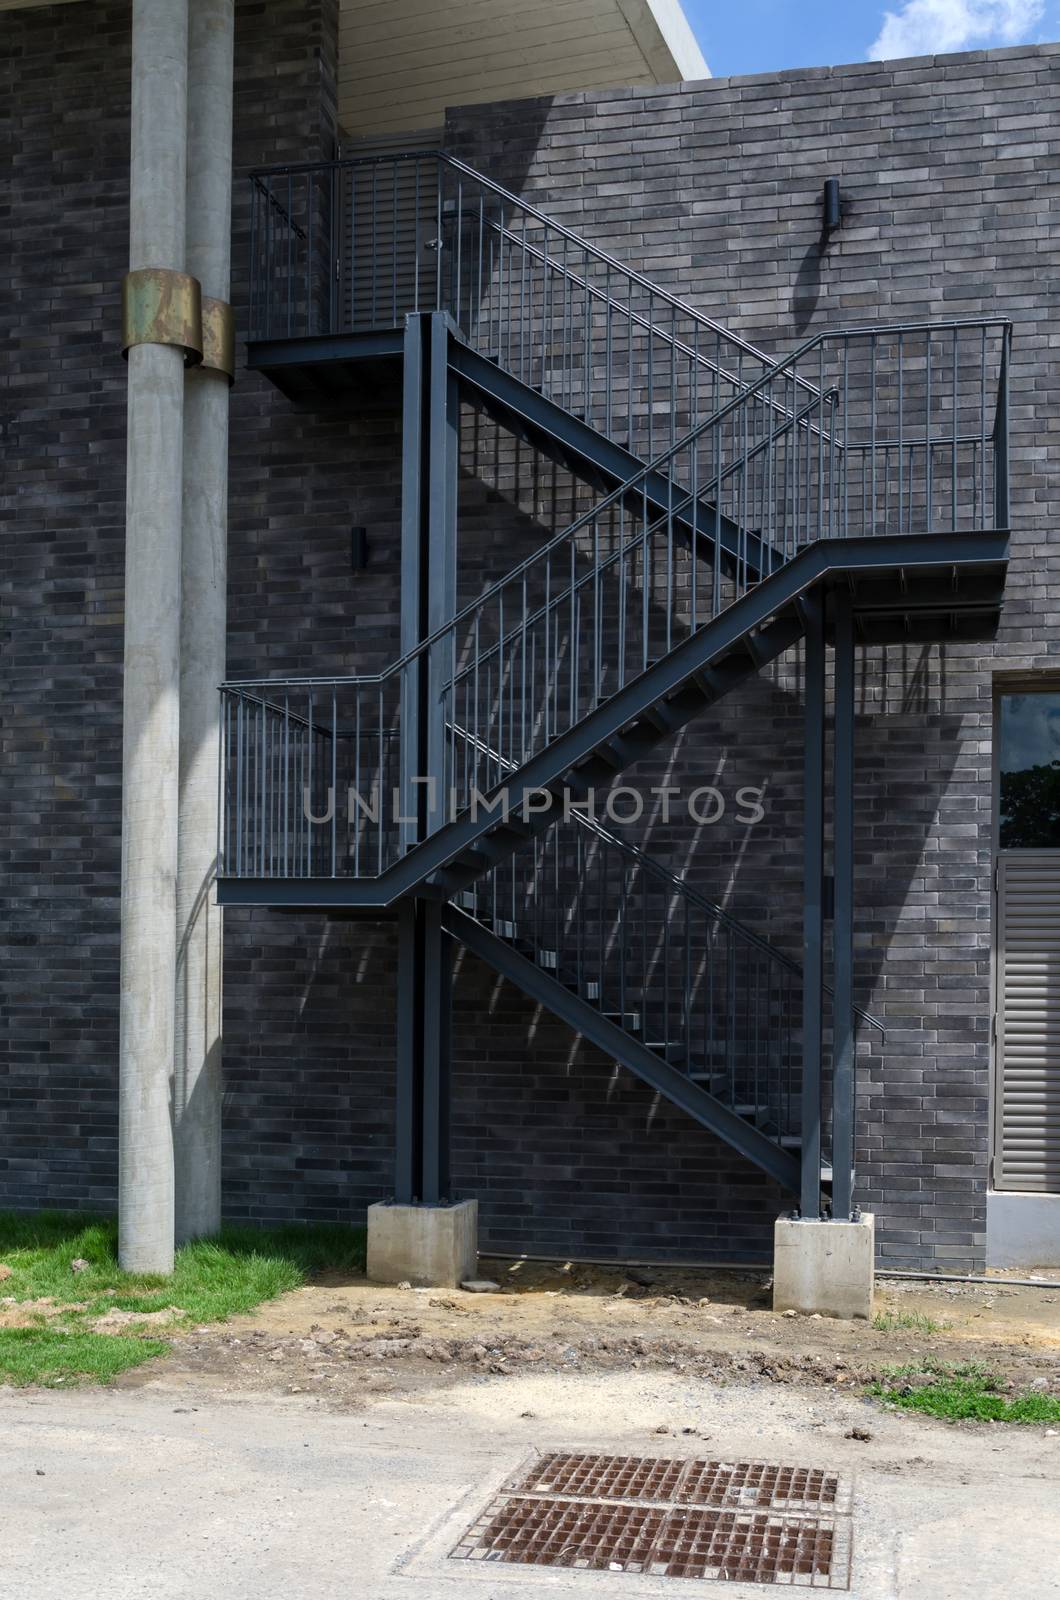 Metal fire escape on the external wall  by siraanamwong